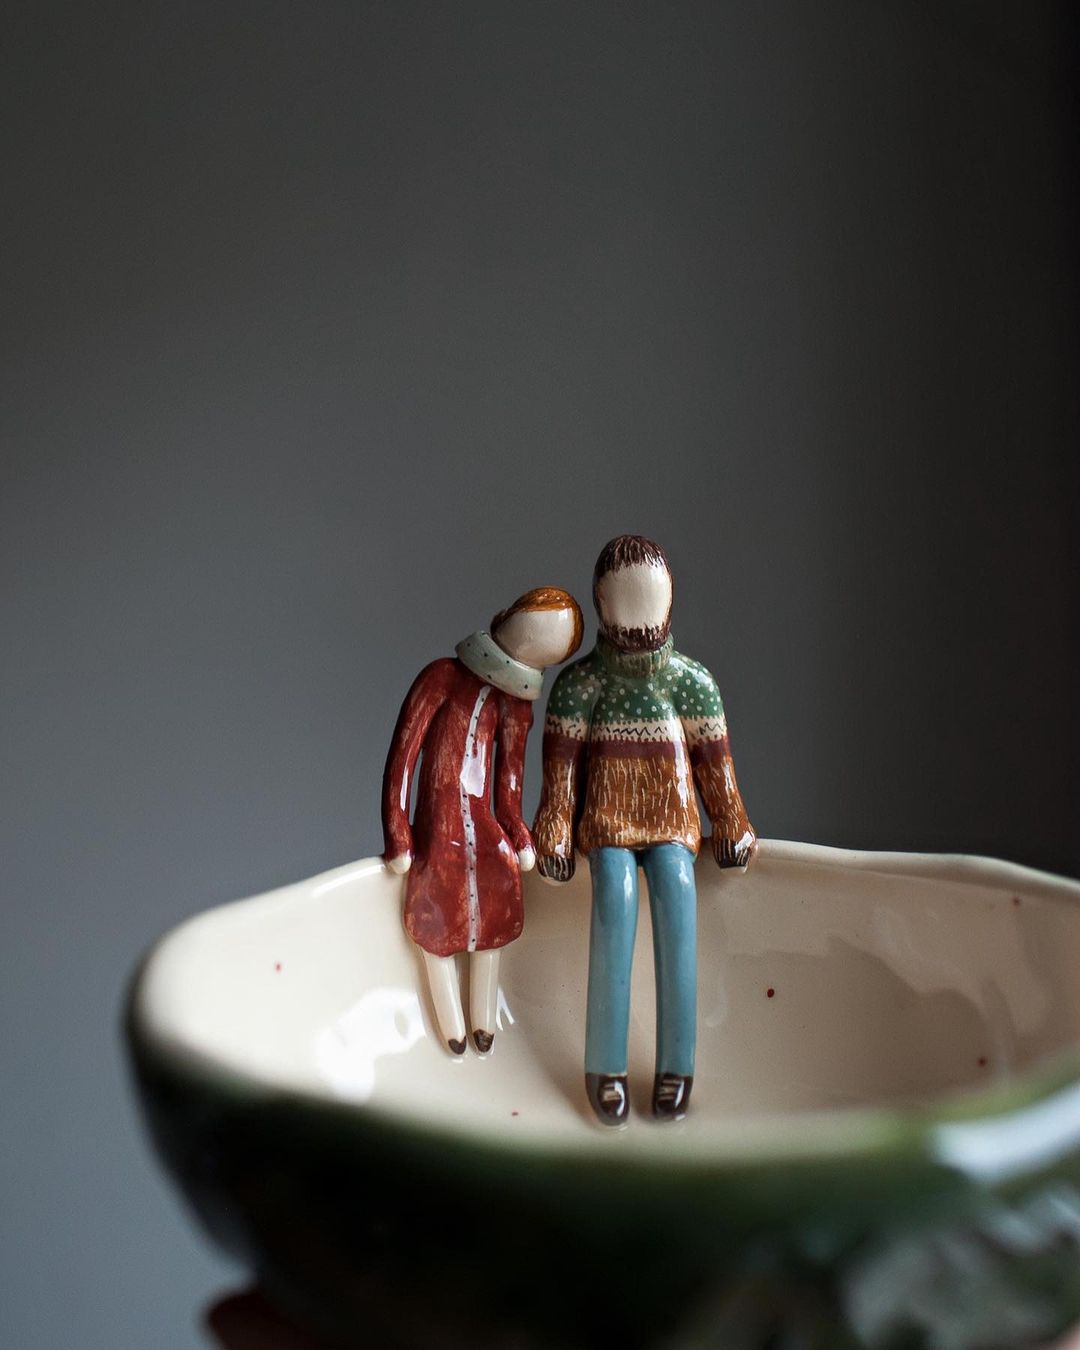 Delicate Ceramics Decorated With Lovely Figure Sculptures By Nadya And Olga (15)